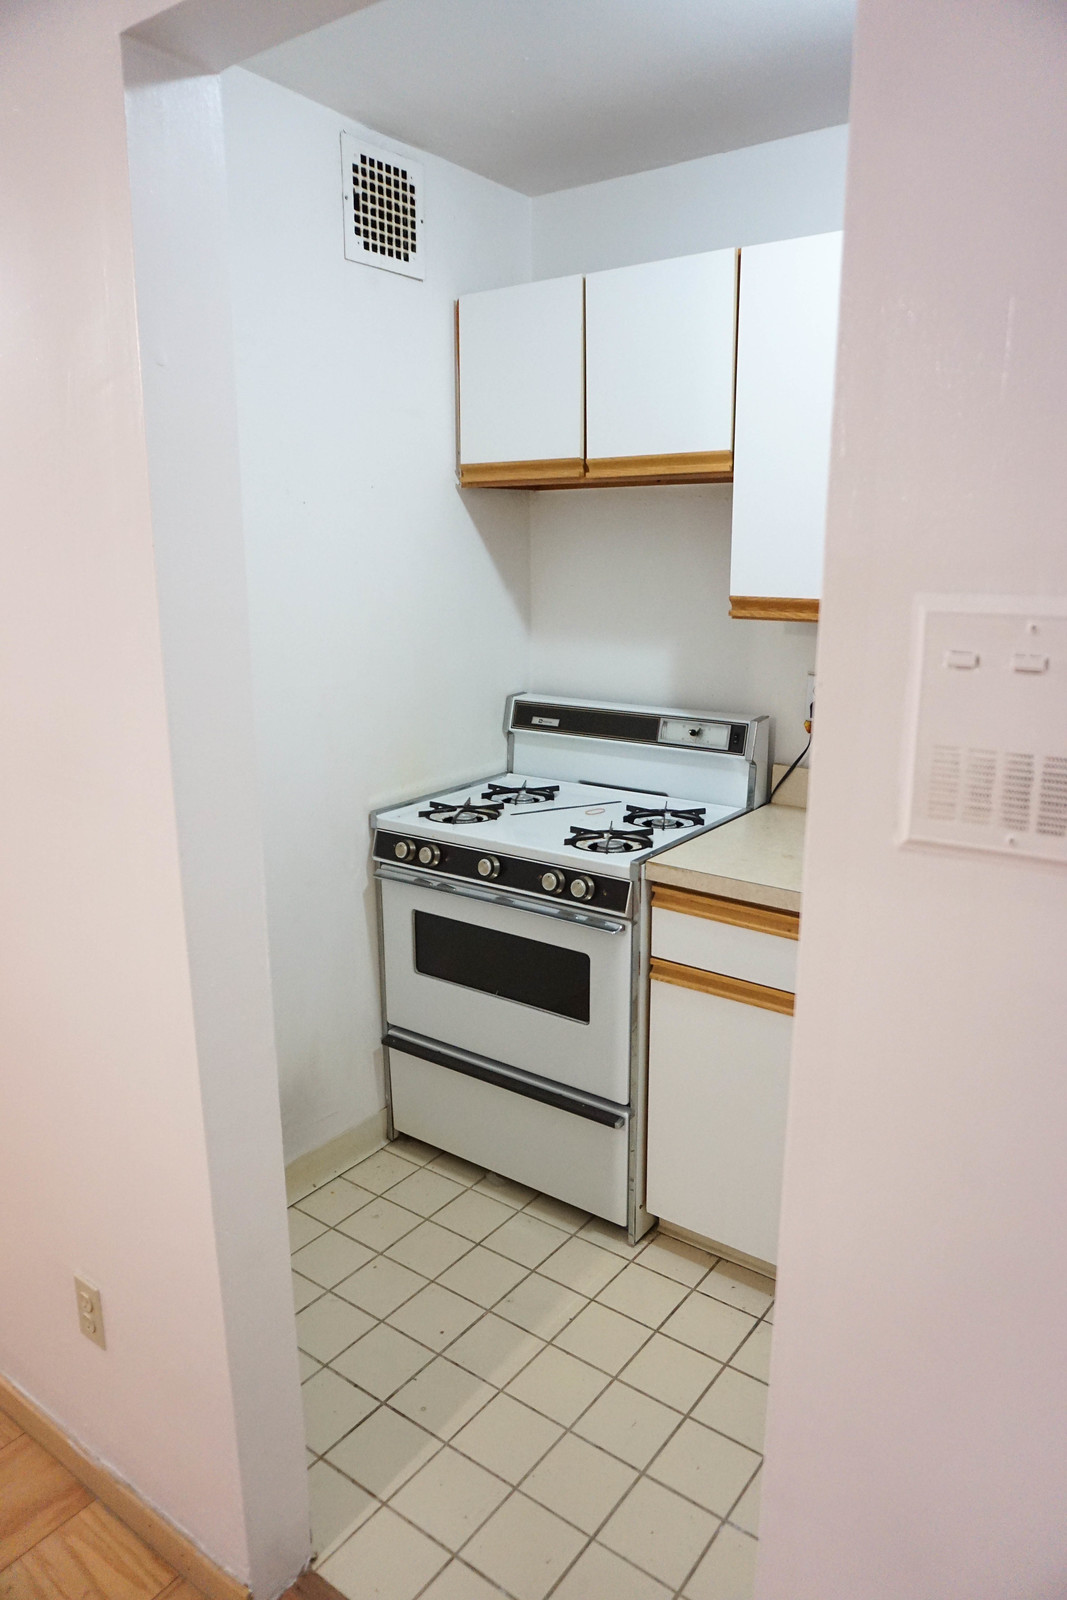 Before & After: My New York Apartment Kitchen Renovation | 1970s Cabinets Small Kitchen | Living After Midnite Jackie Giardina